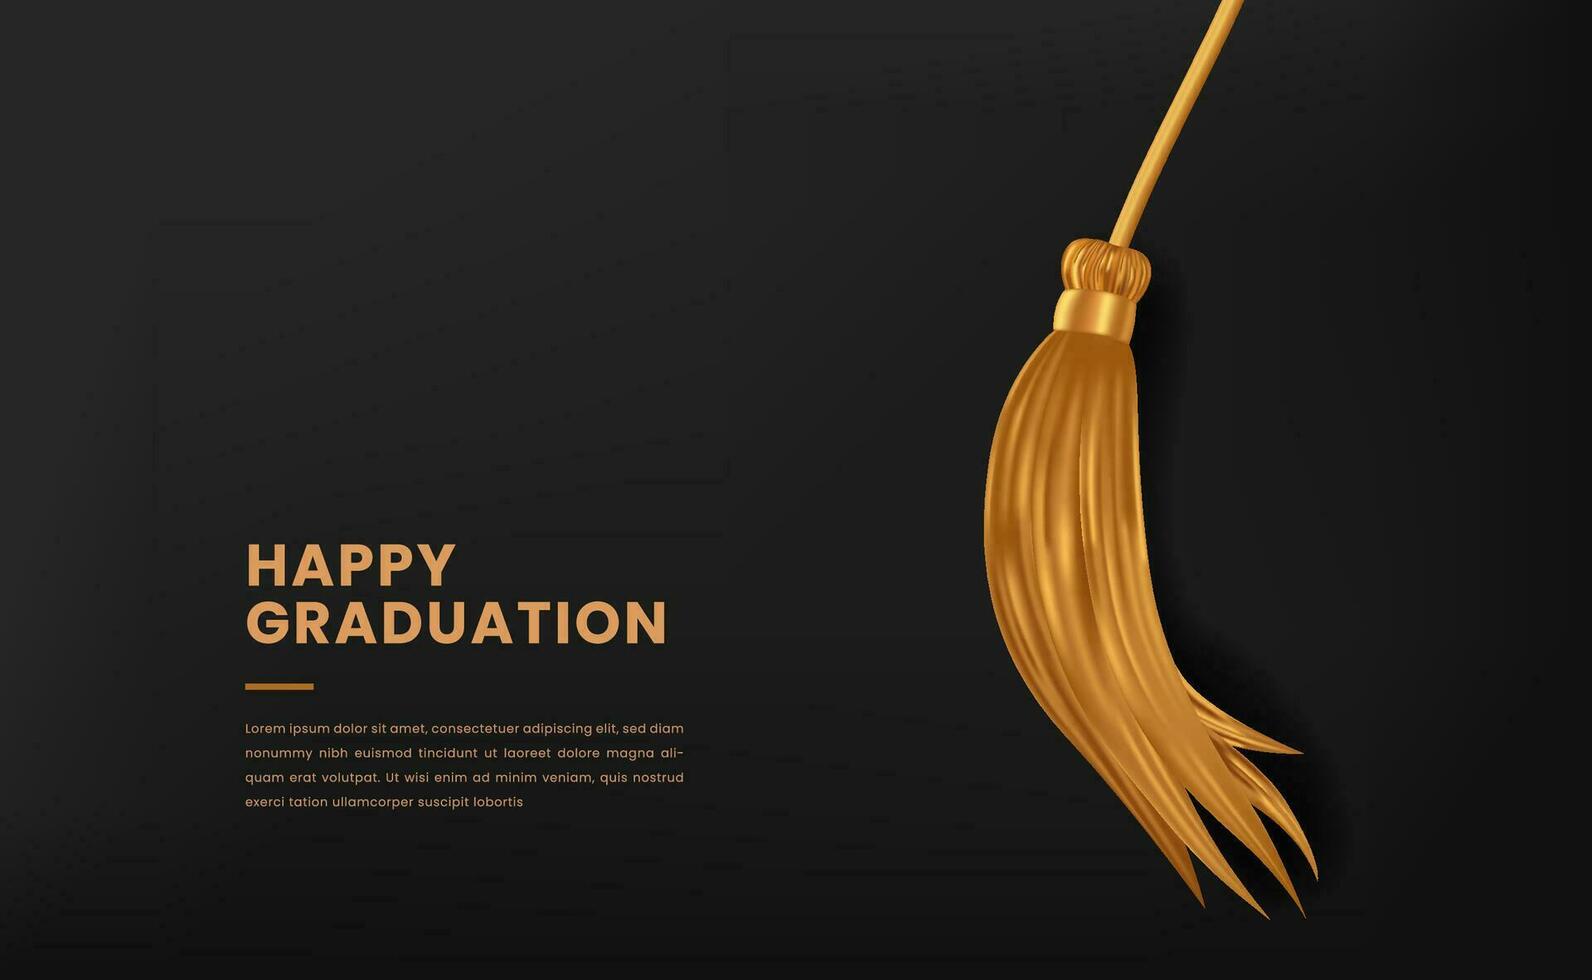 Happy graduation party celebration invitation with gold tassel graduate collage with black background vector